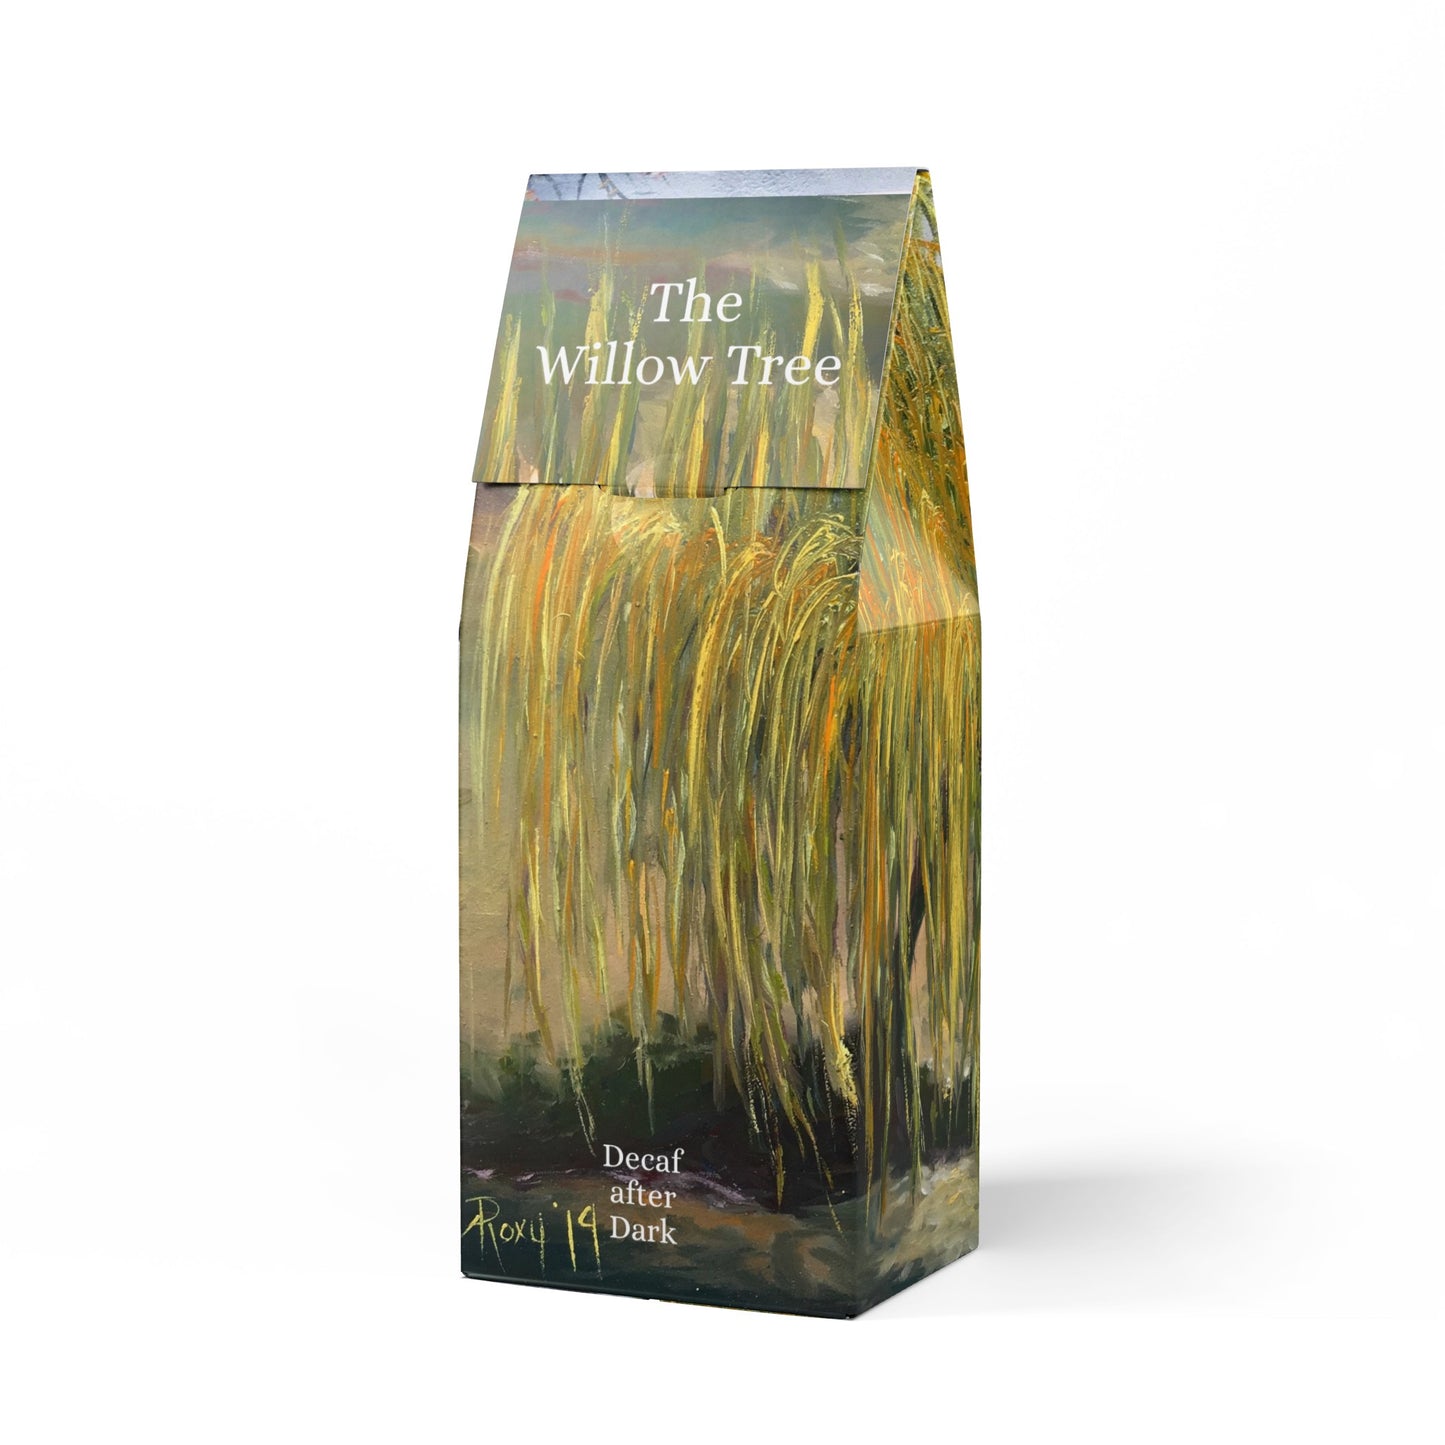 The Willow Tree-Decaf after Dark-Twilight Toast- Decaf Coffee Blend